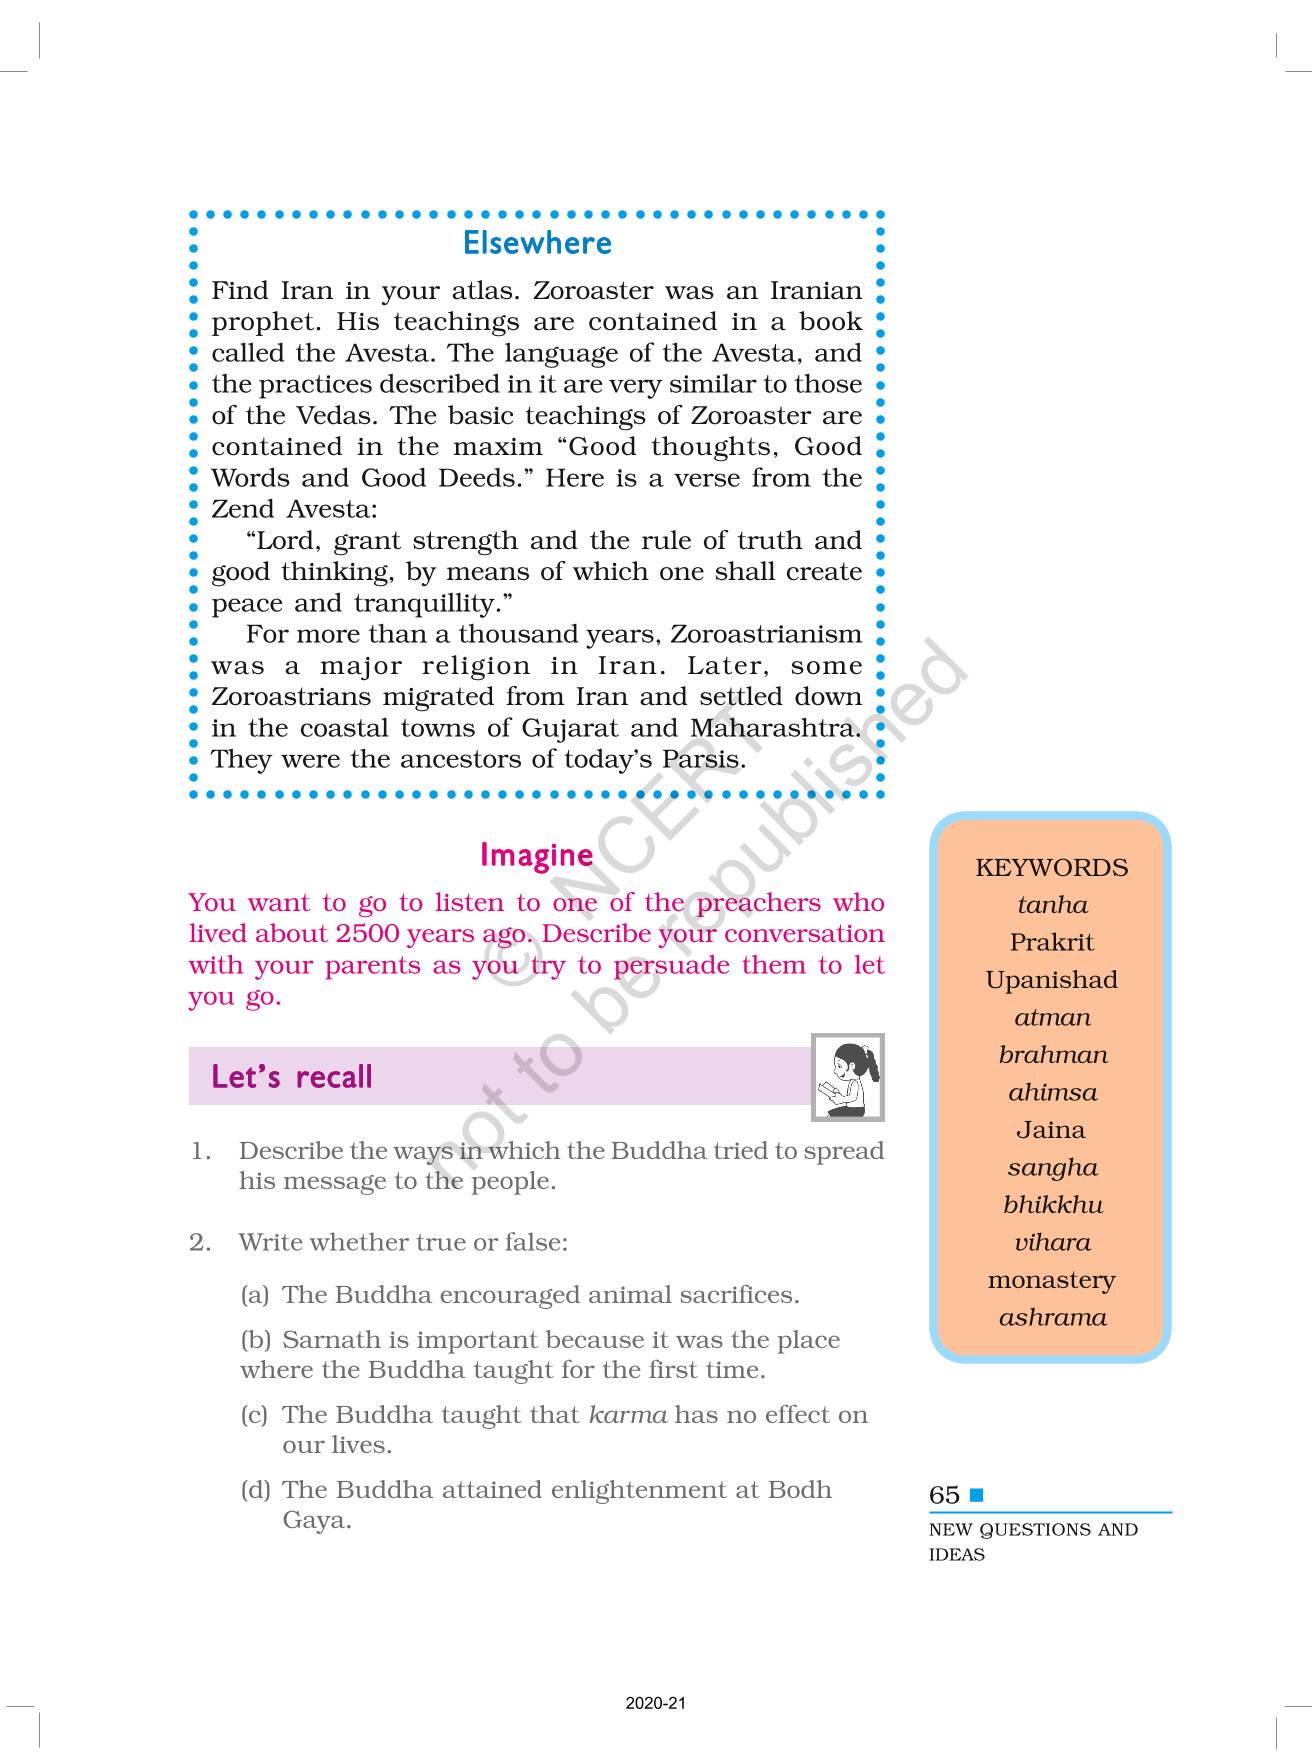 New Questions And Ideas - NCERT Book of Class 6 History Our Pasts I